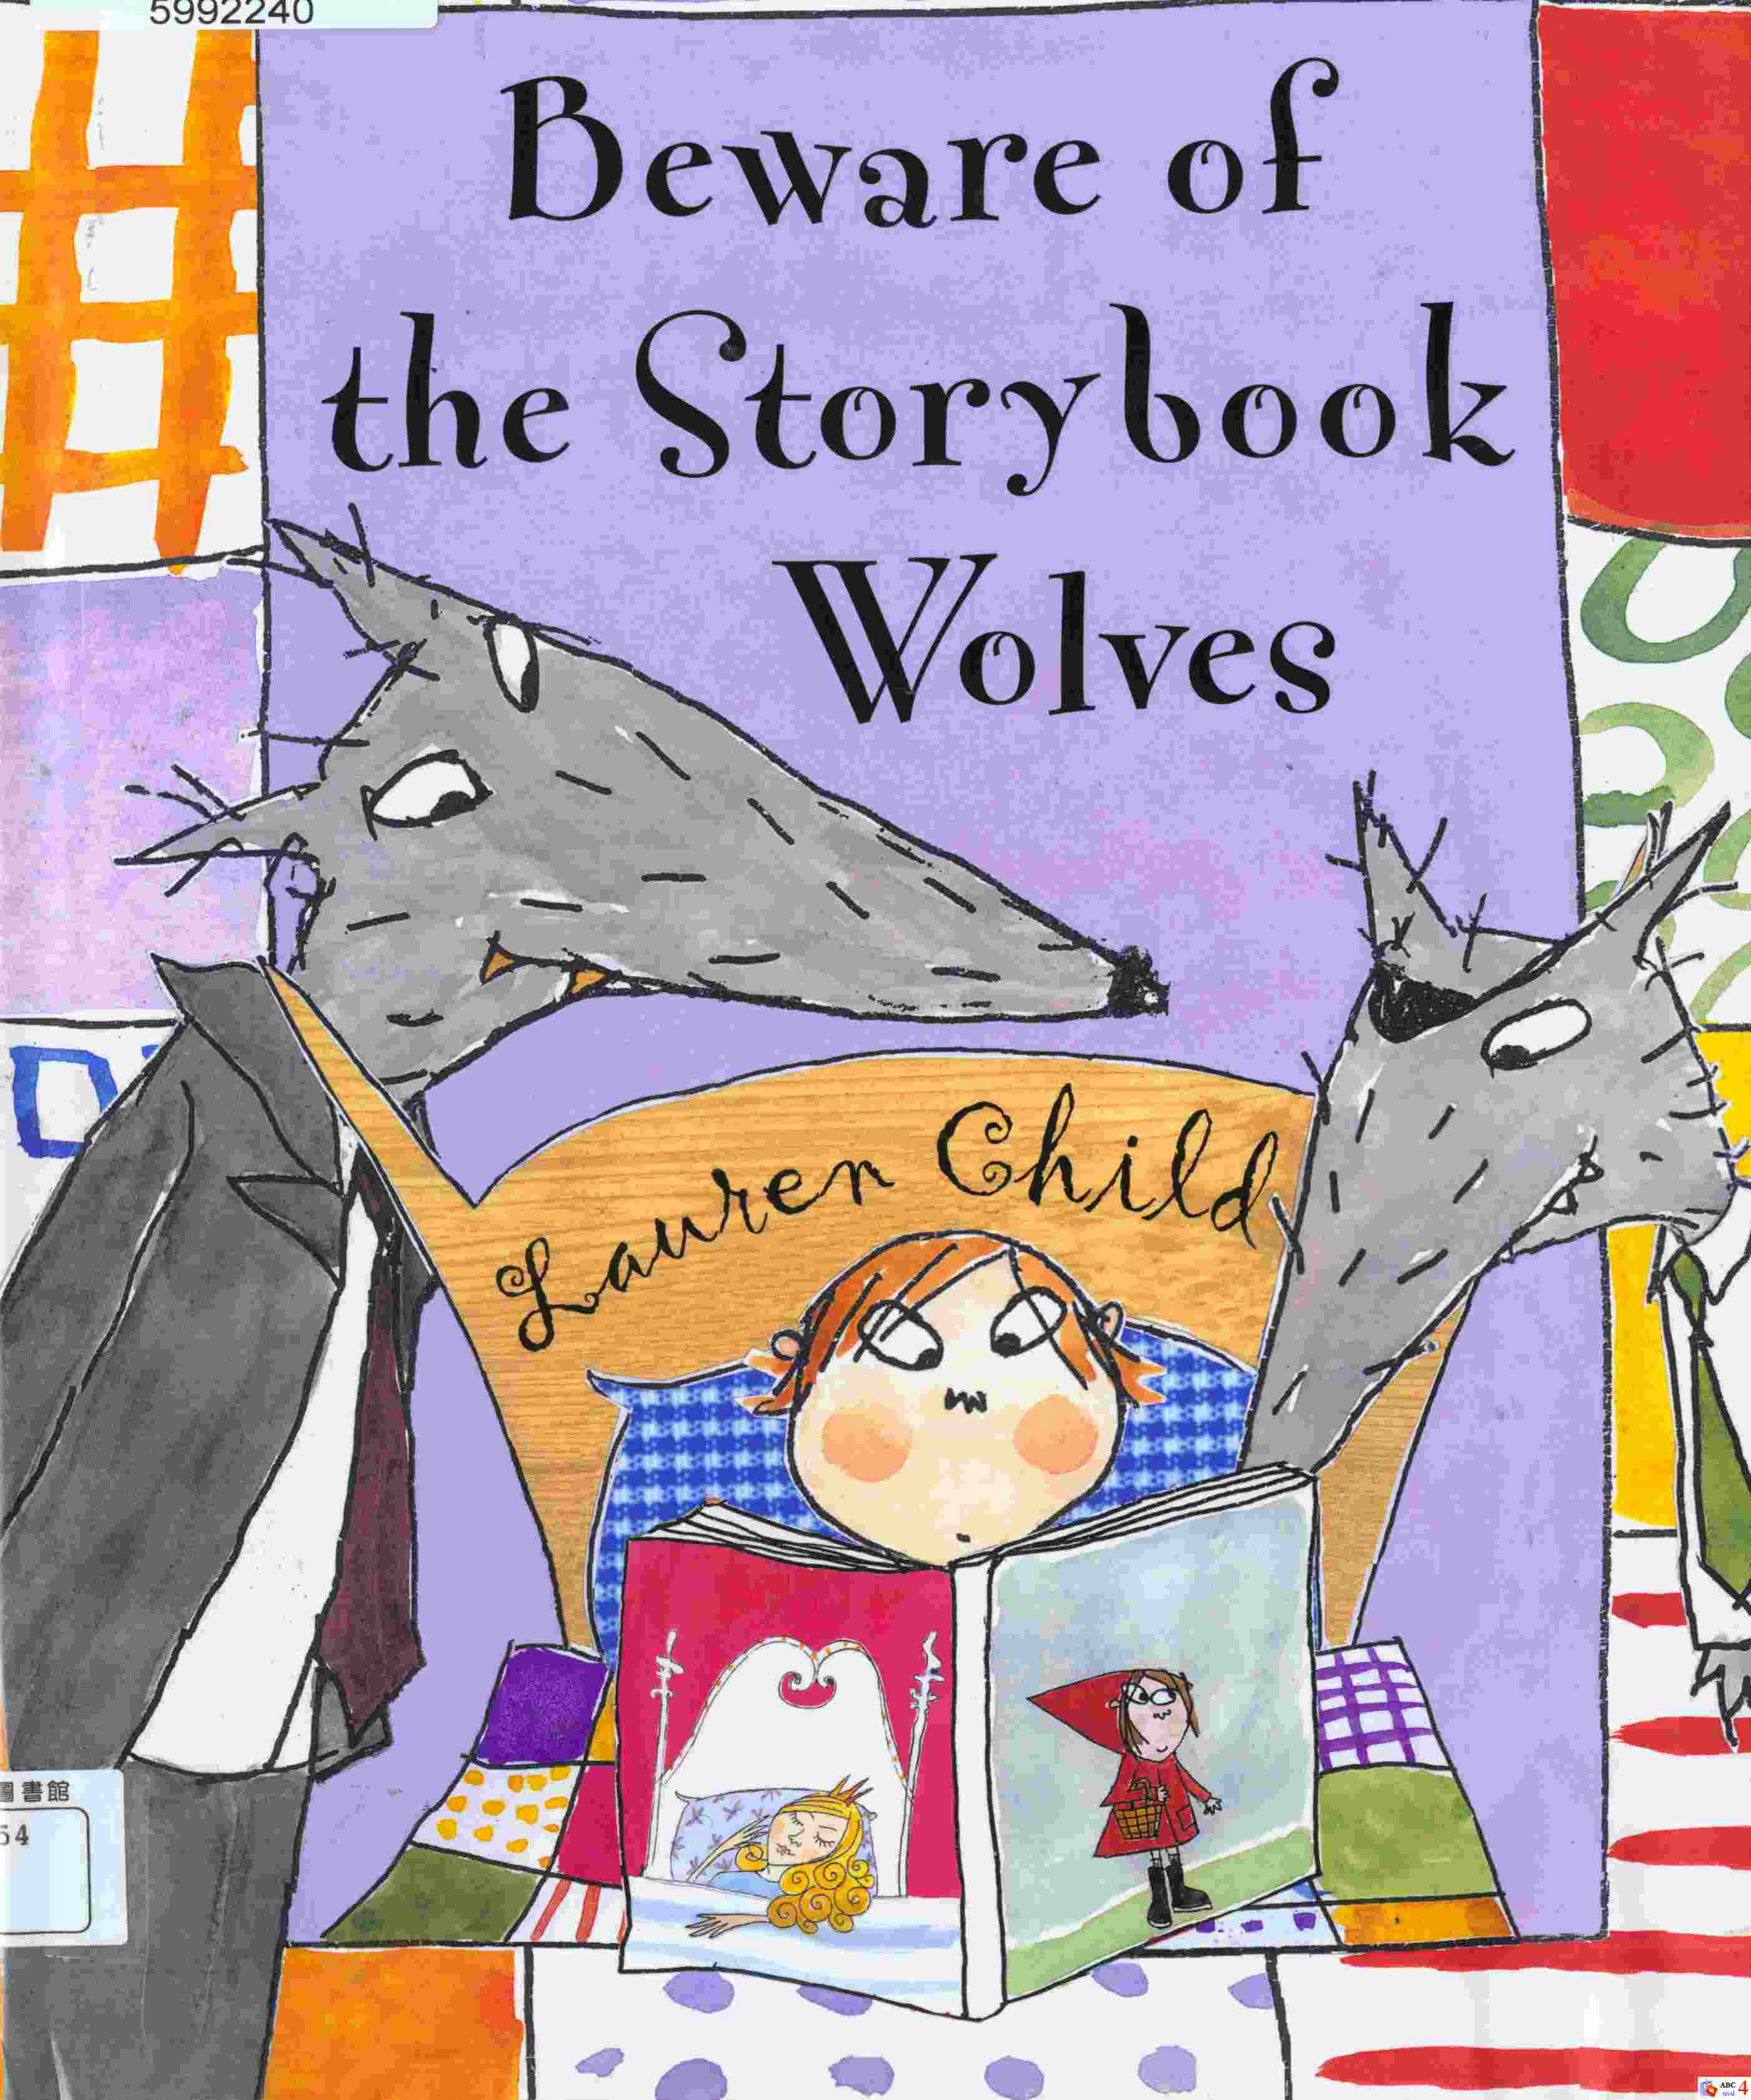 Beware of the storybook wolves 封面